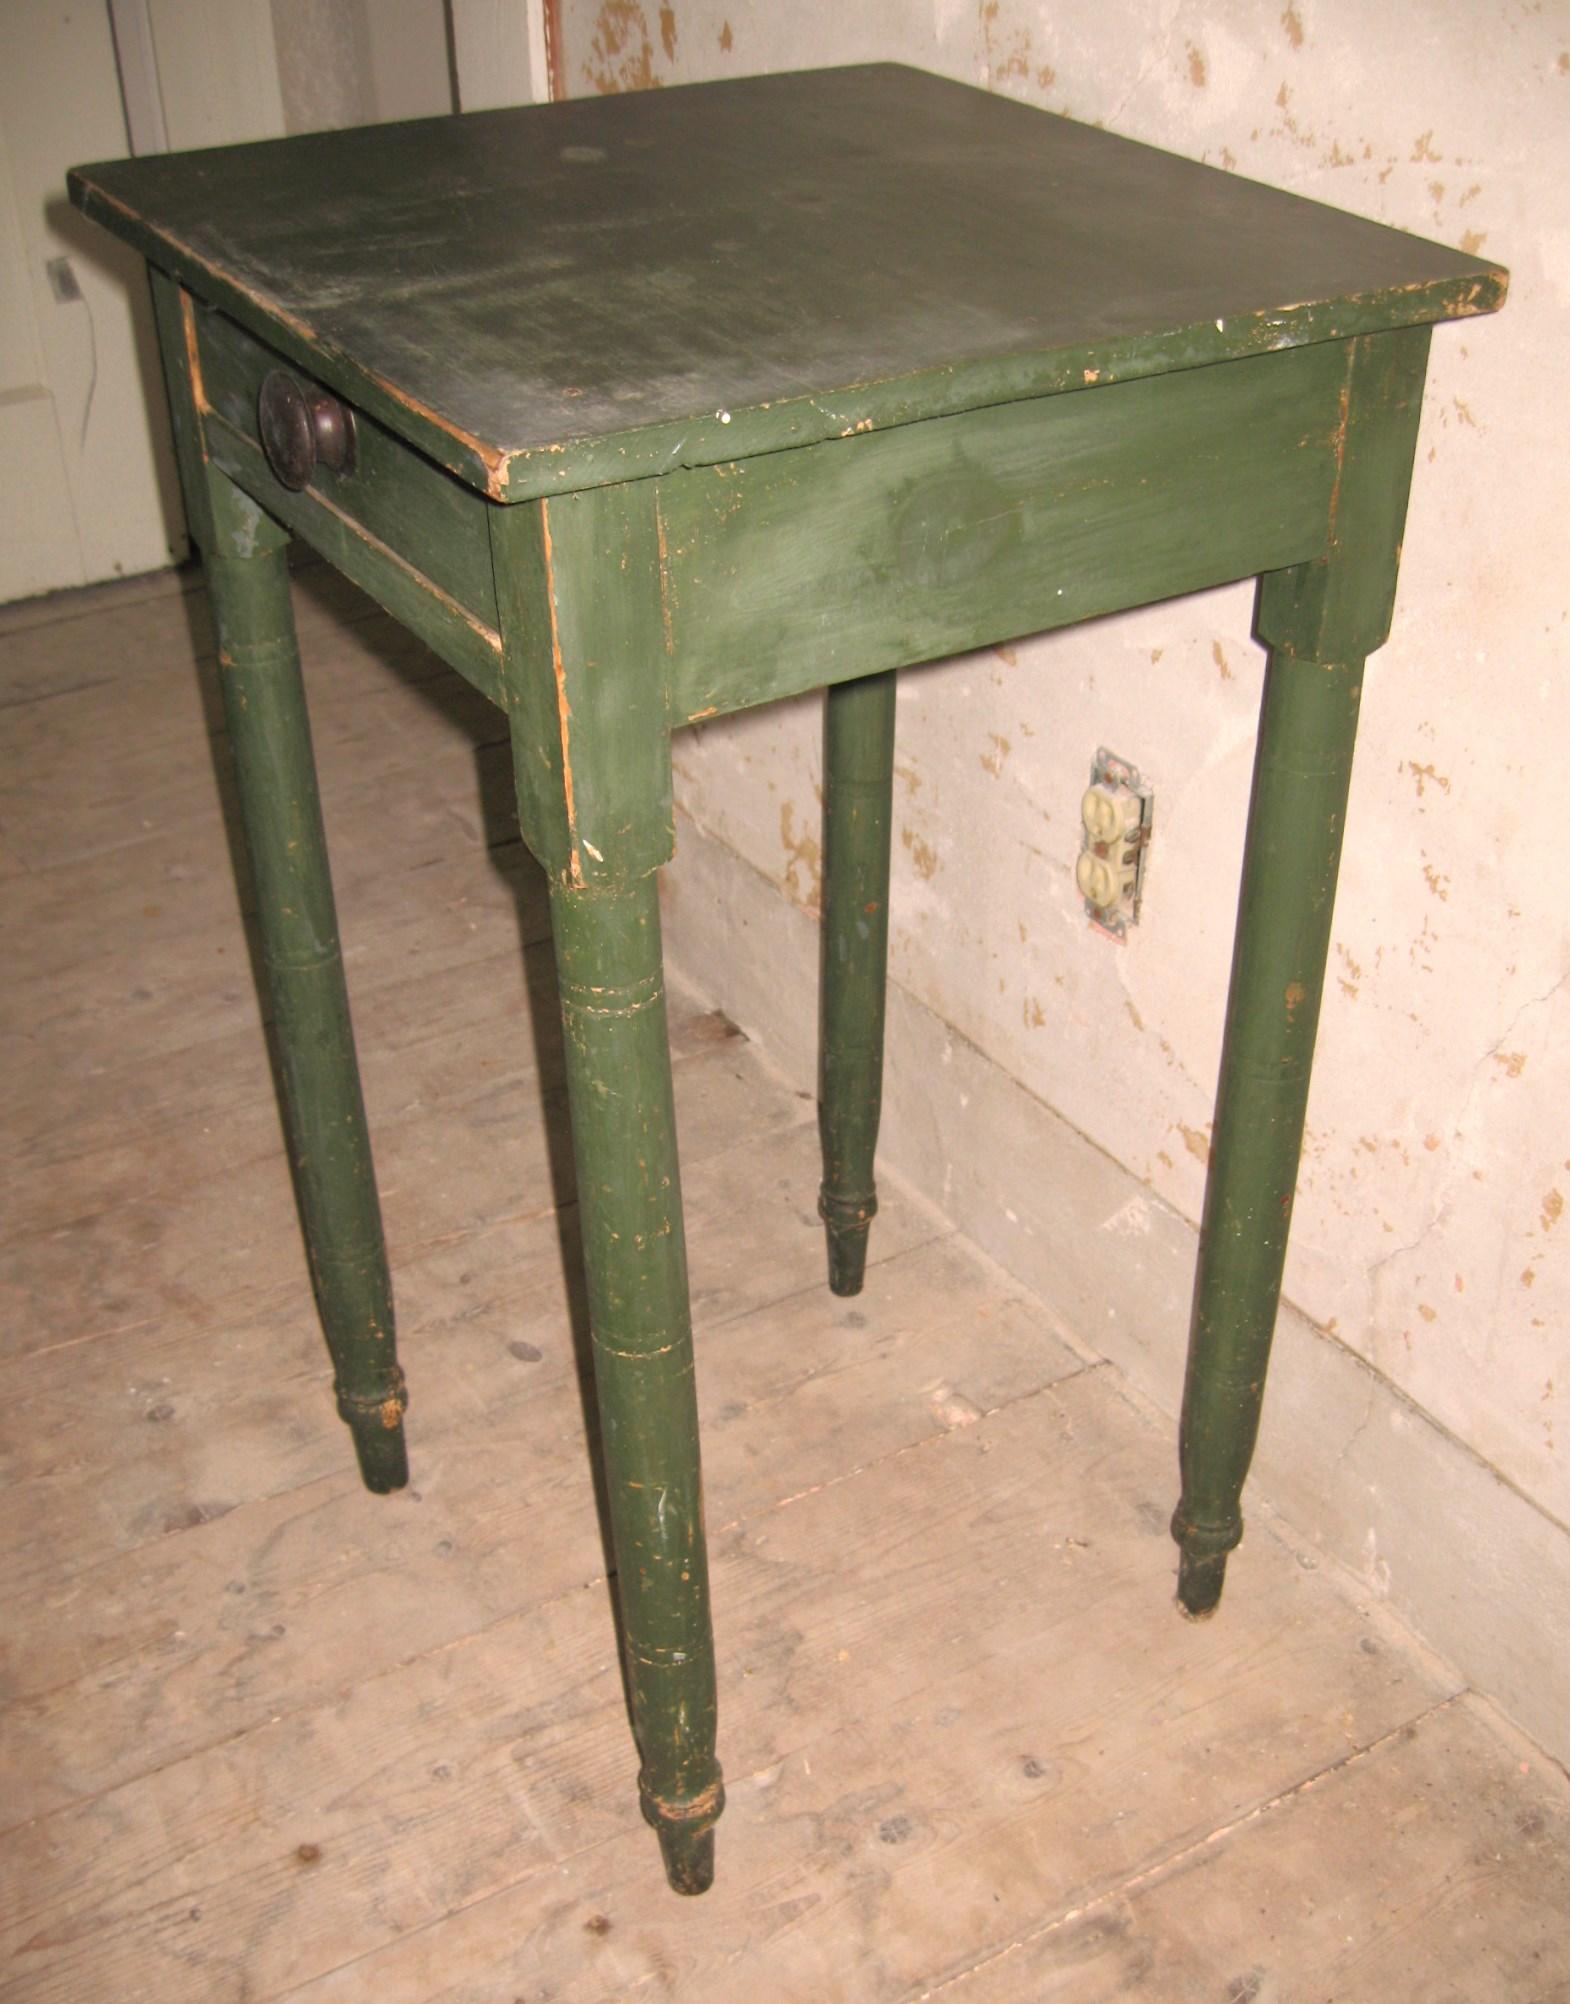 Early 19th century primitive 1 drawer stand, nice early stand in the old green paint. Made of pine. Turned legs are pinned at the aprons. Nice Dovetailed drawer. Original Green Paint just the way it came out of my 1769 farmhouse In The Hudson Valley